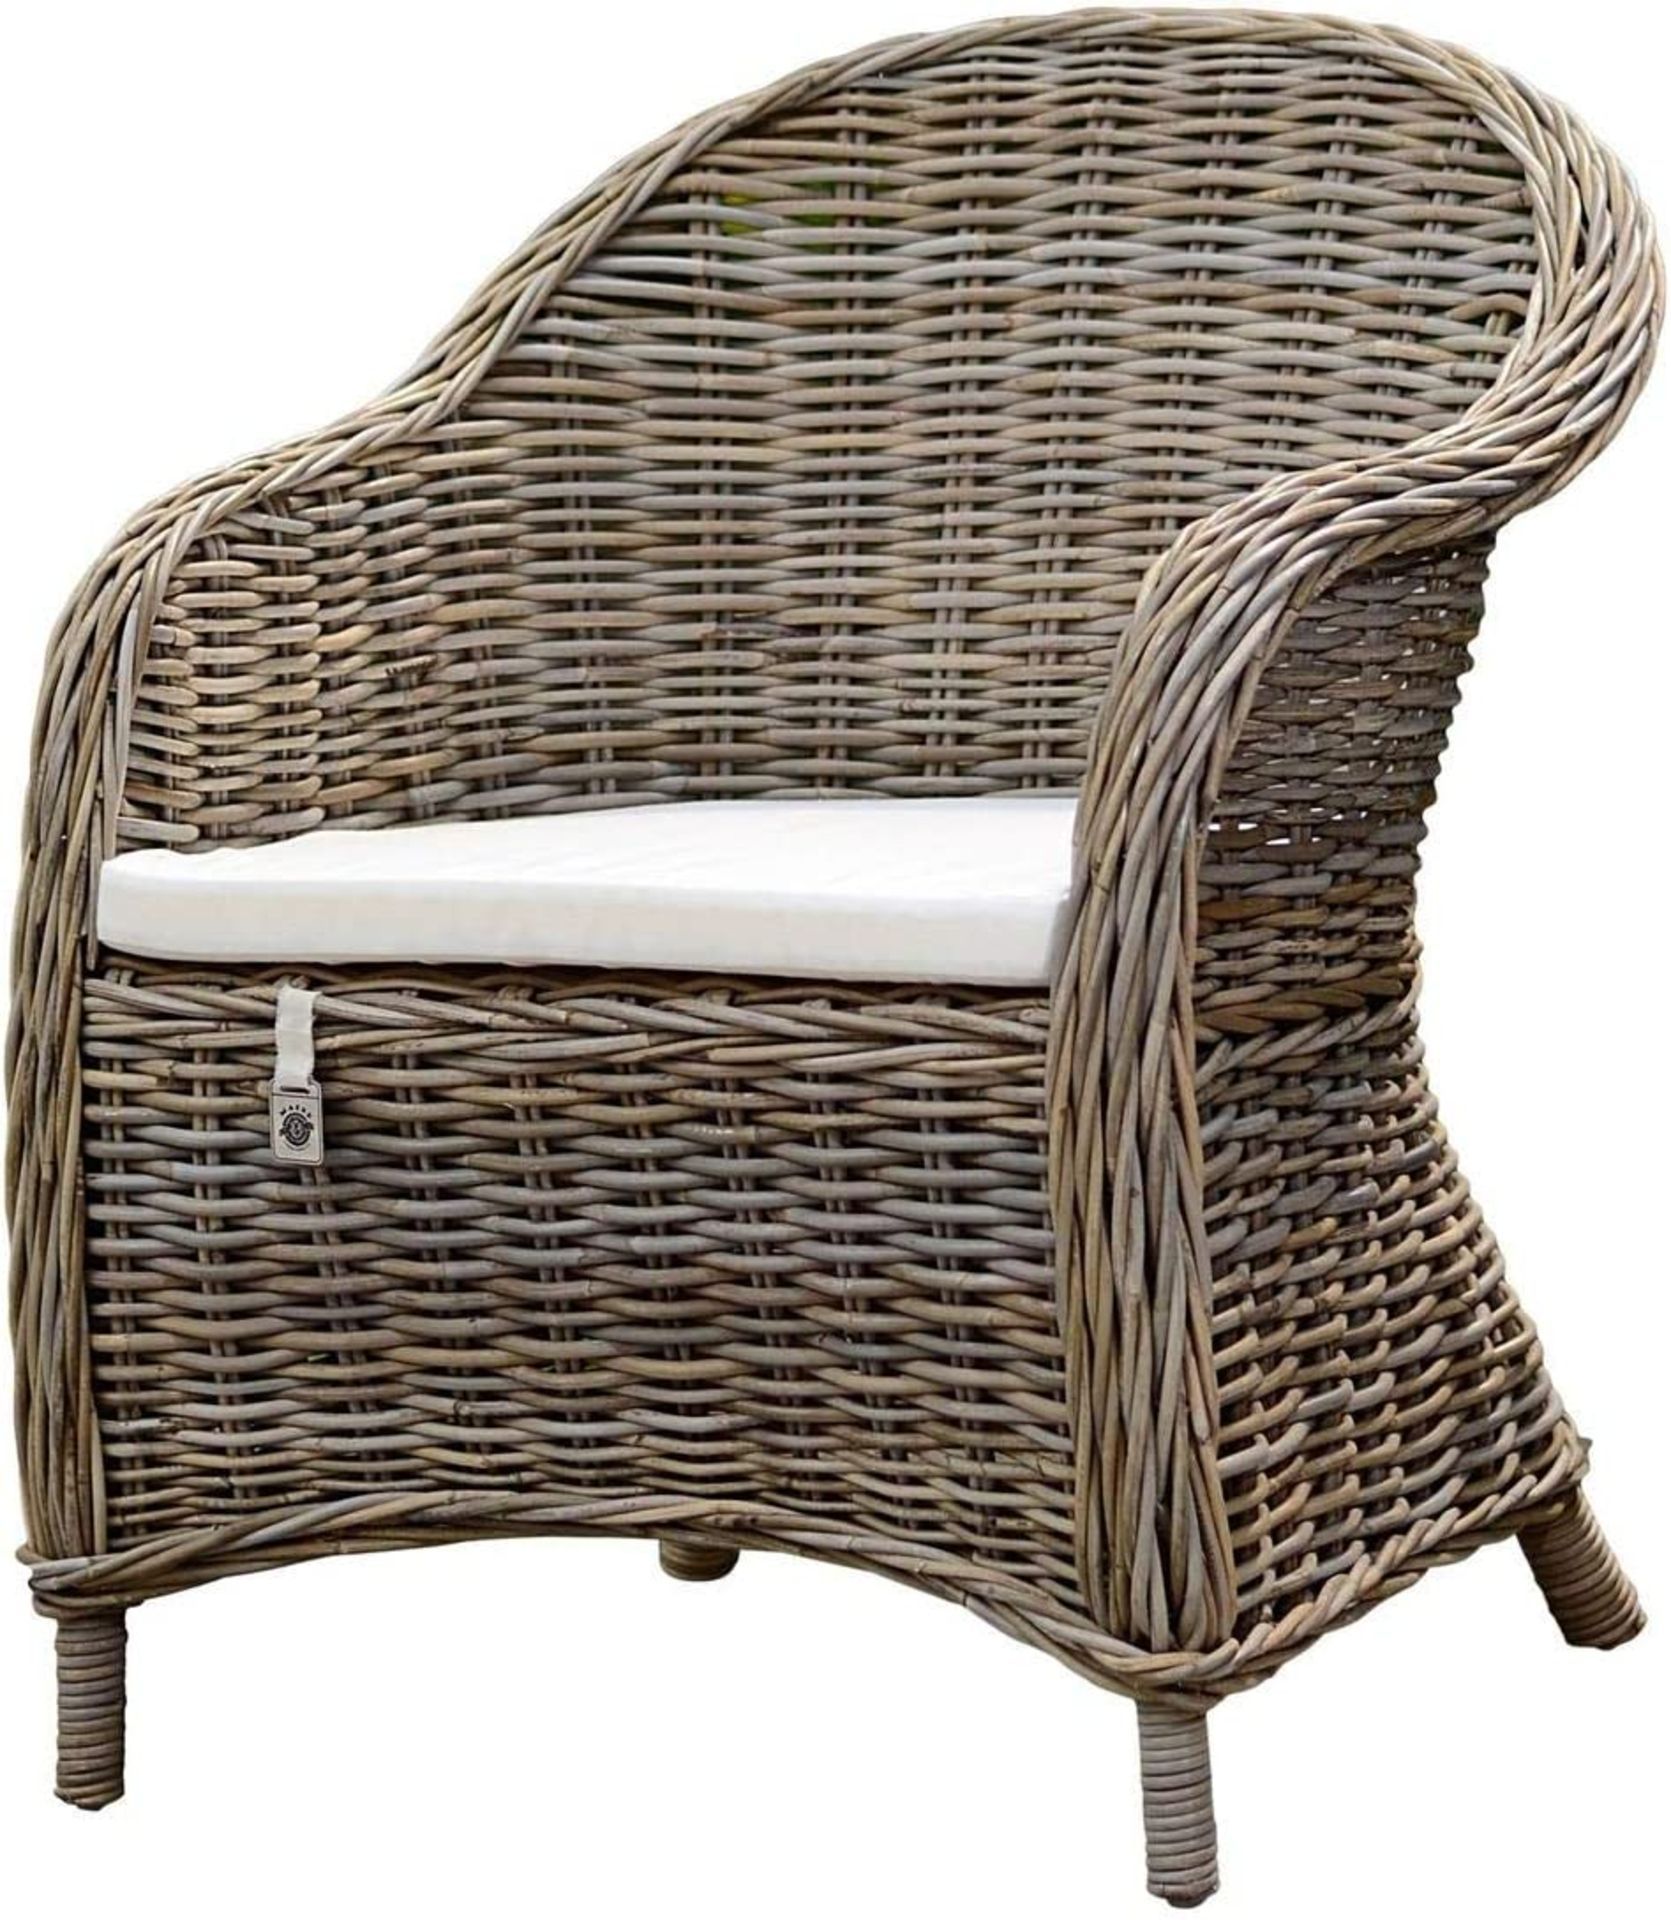 NEW & BOXED 2x Maine Furniture Co. Kubu Rattan Armchair with Cushion. (SR5). (SKU: M500156). STRONG, - Image 2 of 4